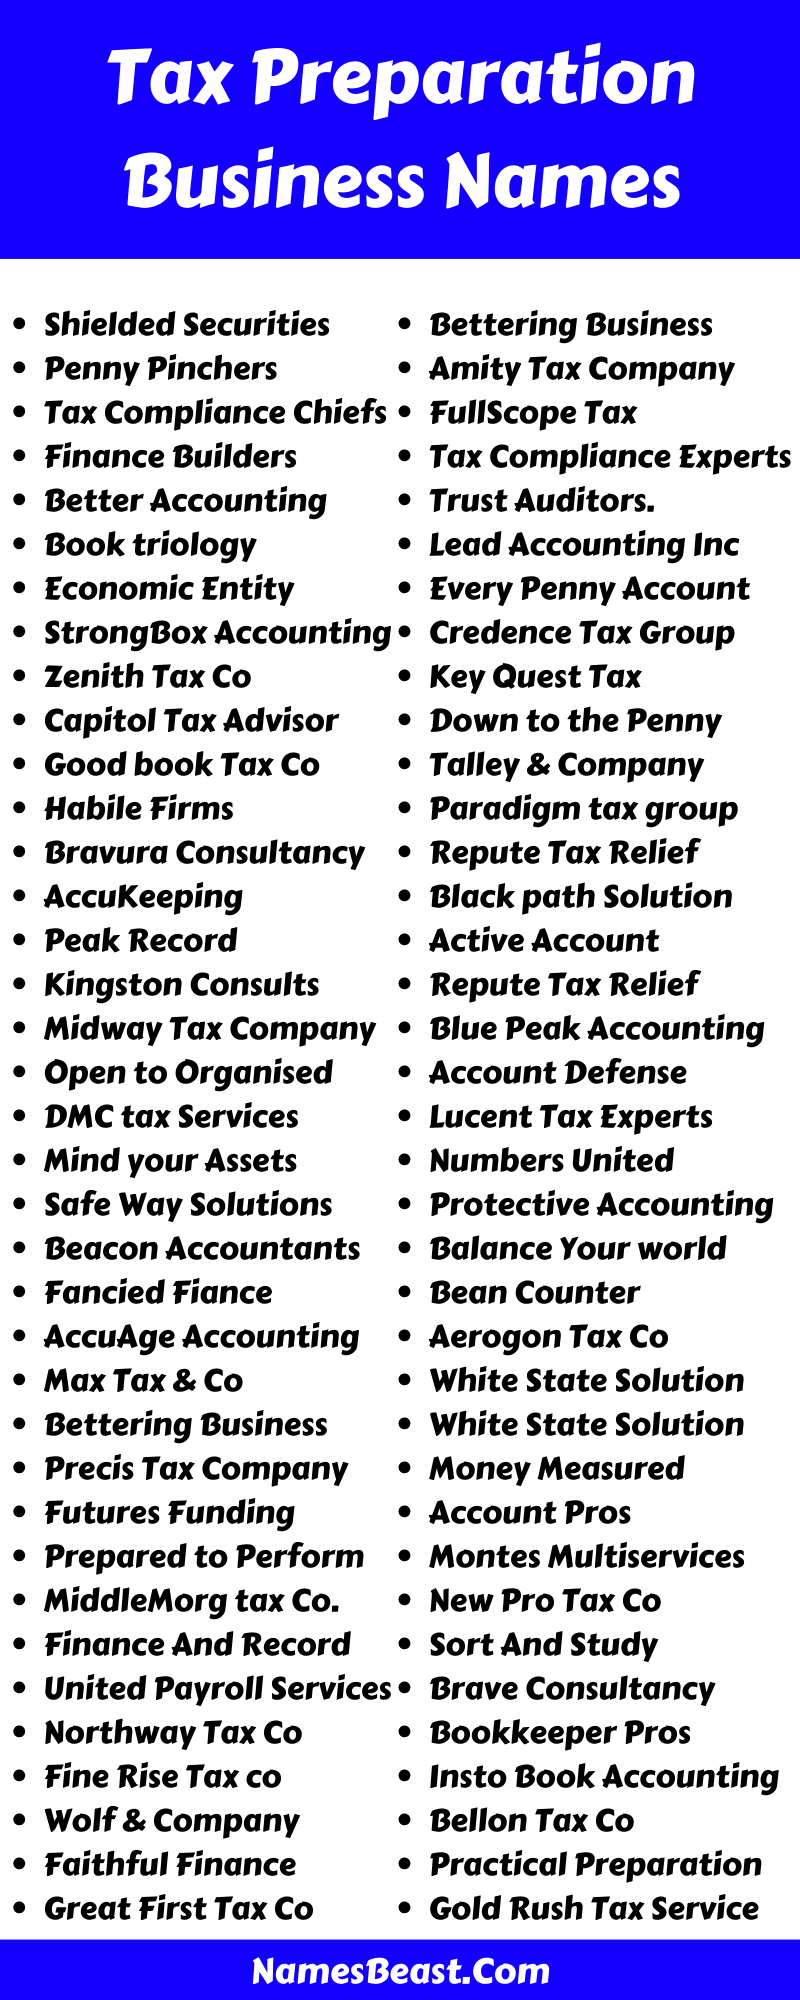 450+ Tax Preparation Business Names To Help You Stand Out